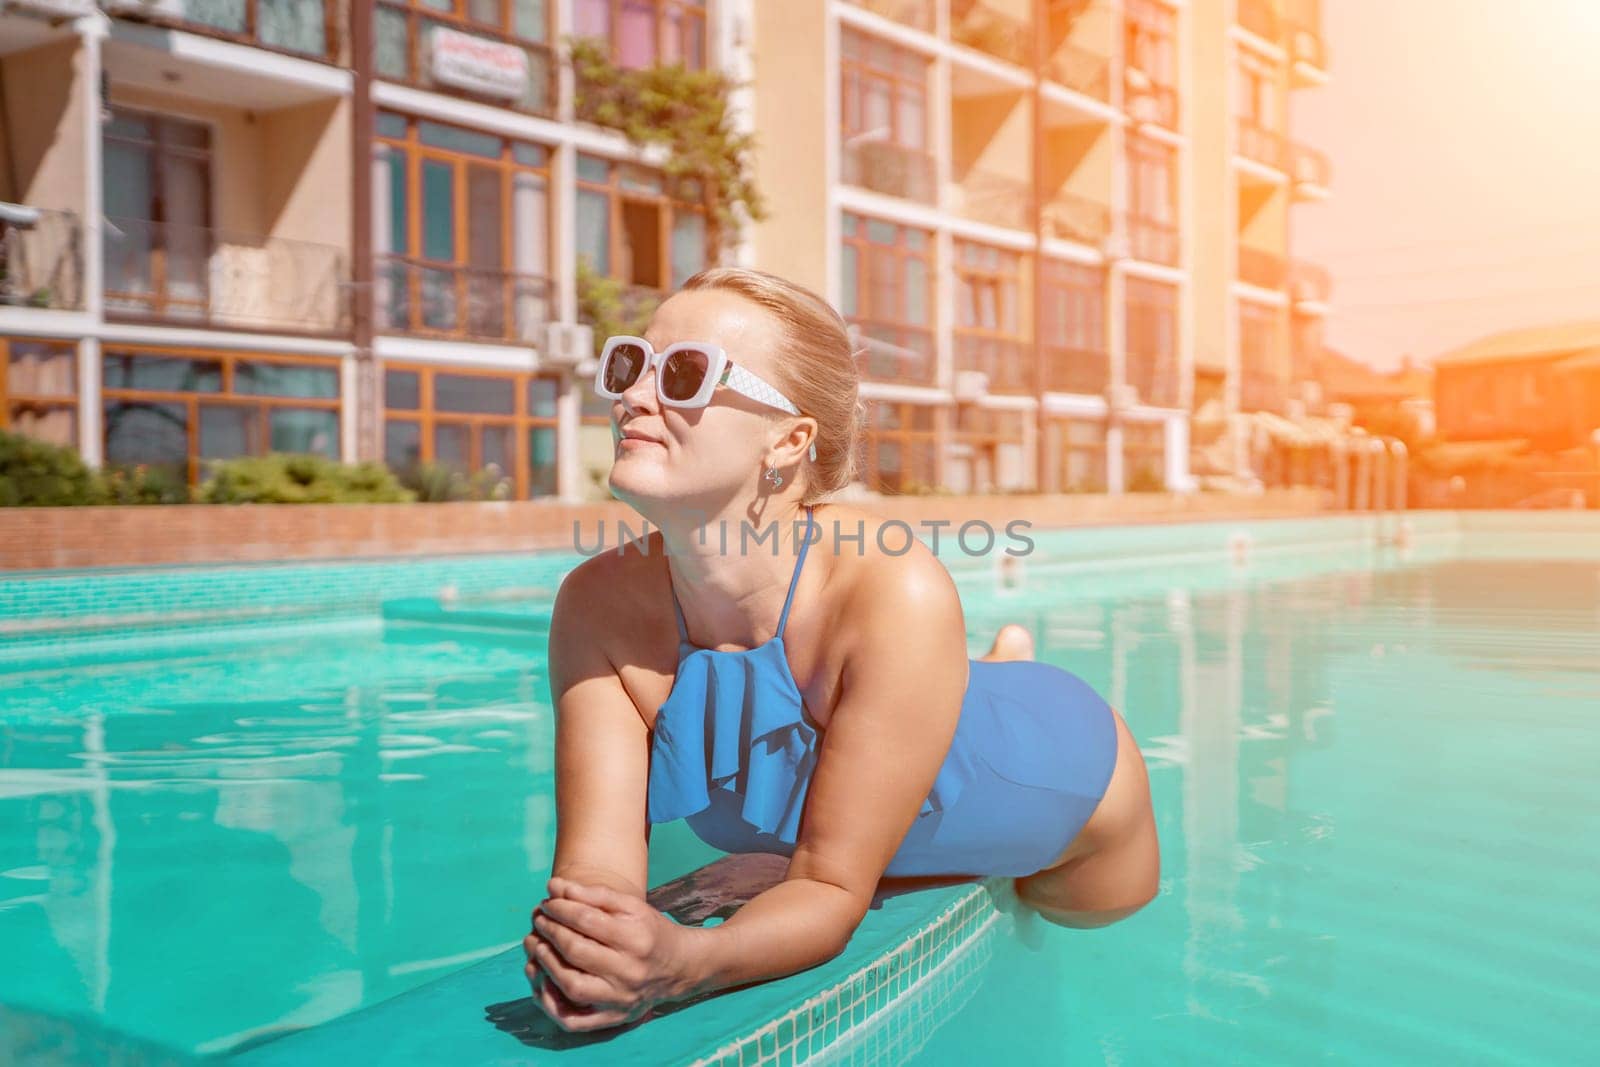 Bikini-clad woman enjoys poolside relaxation. Poolside ambiance. Capturing woman's relaxed time near pool. by Matiunina